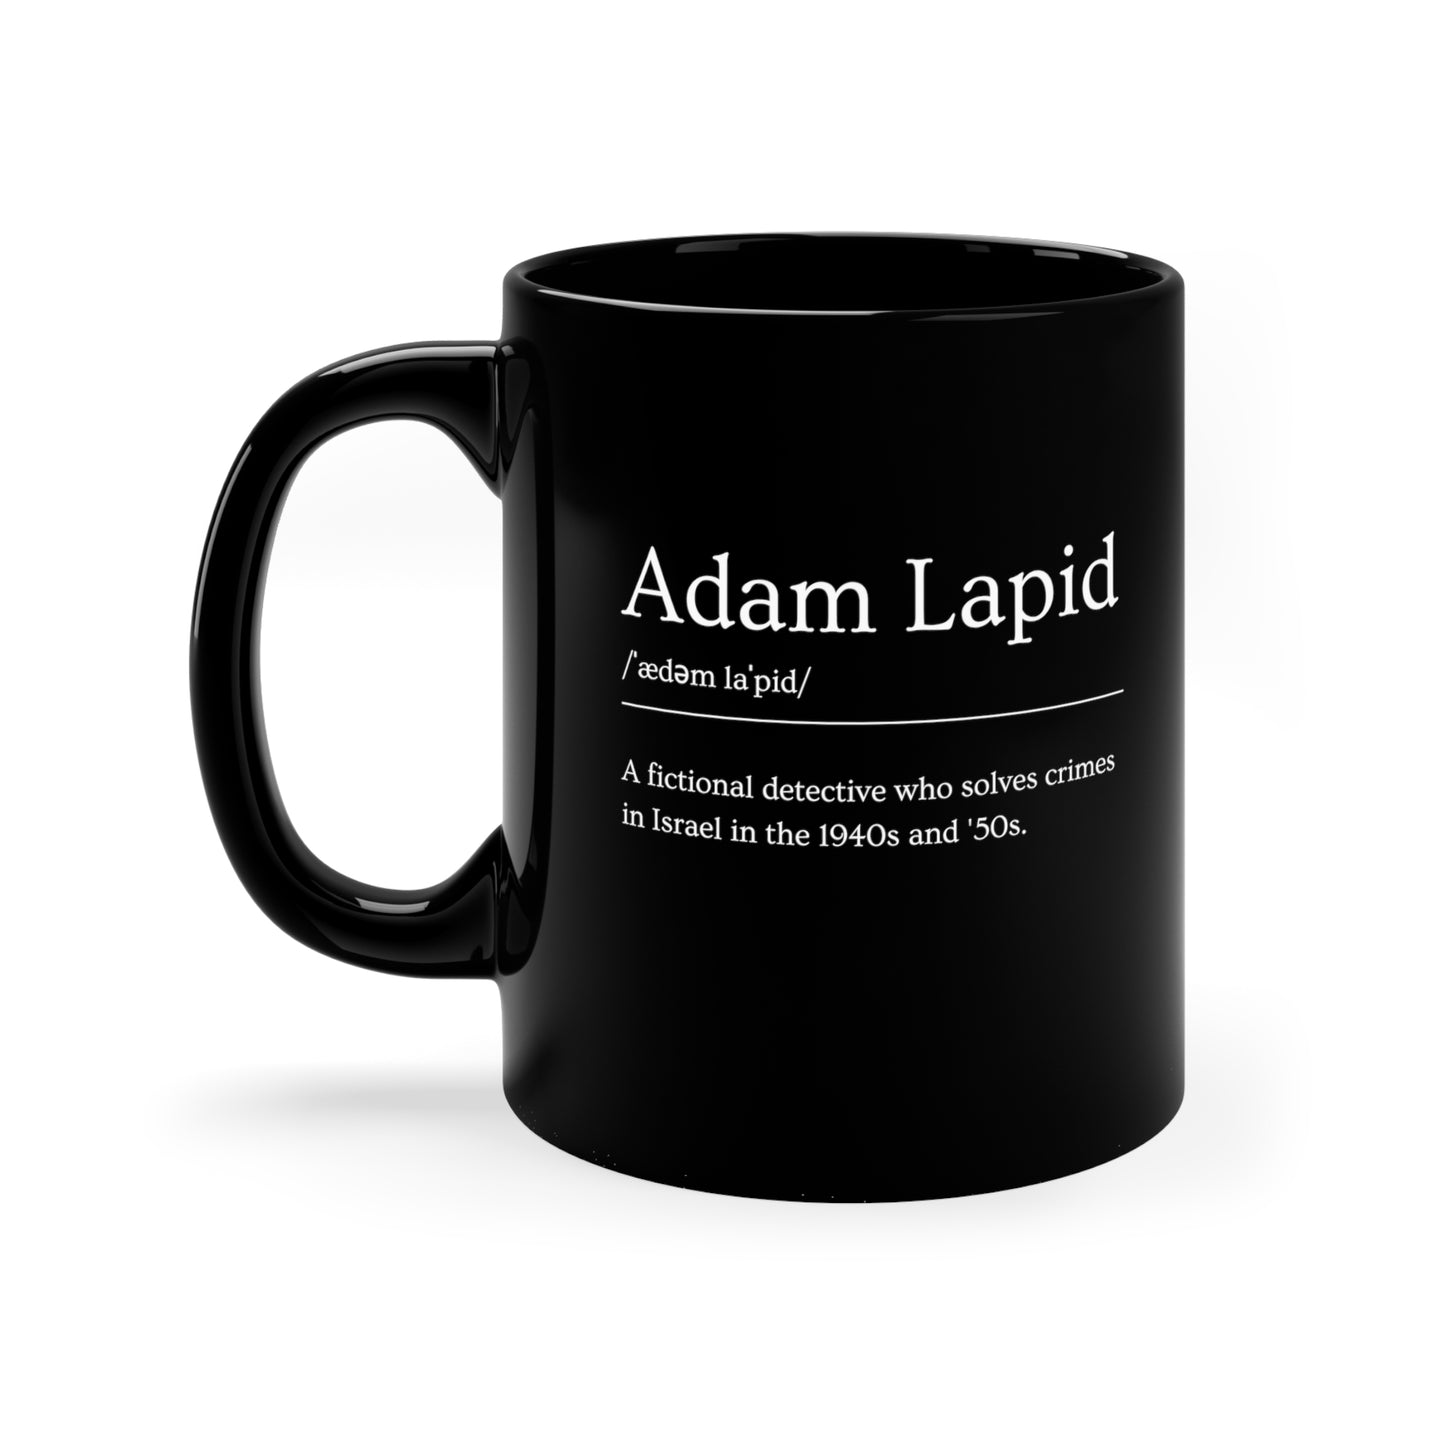 11oz Black Mug with a Tongue-in-Cheek Definition of Adam Lapid, Fictional PI